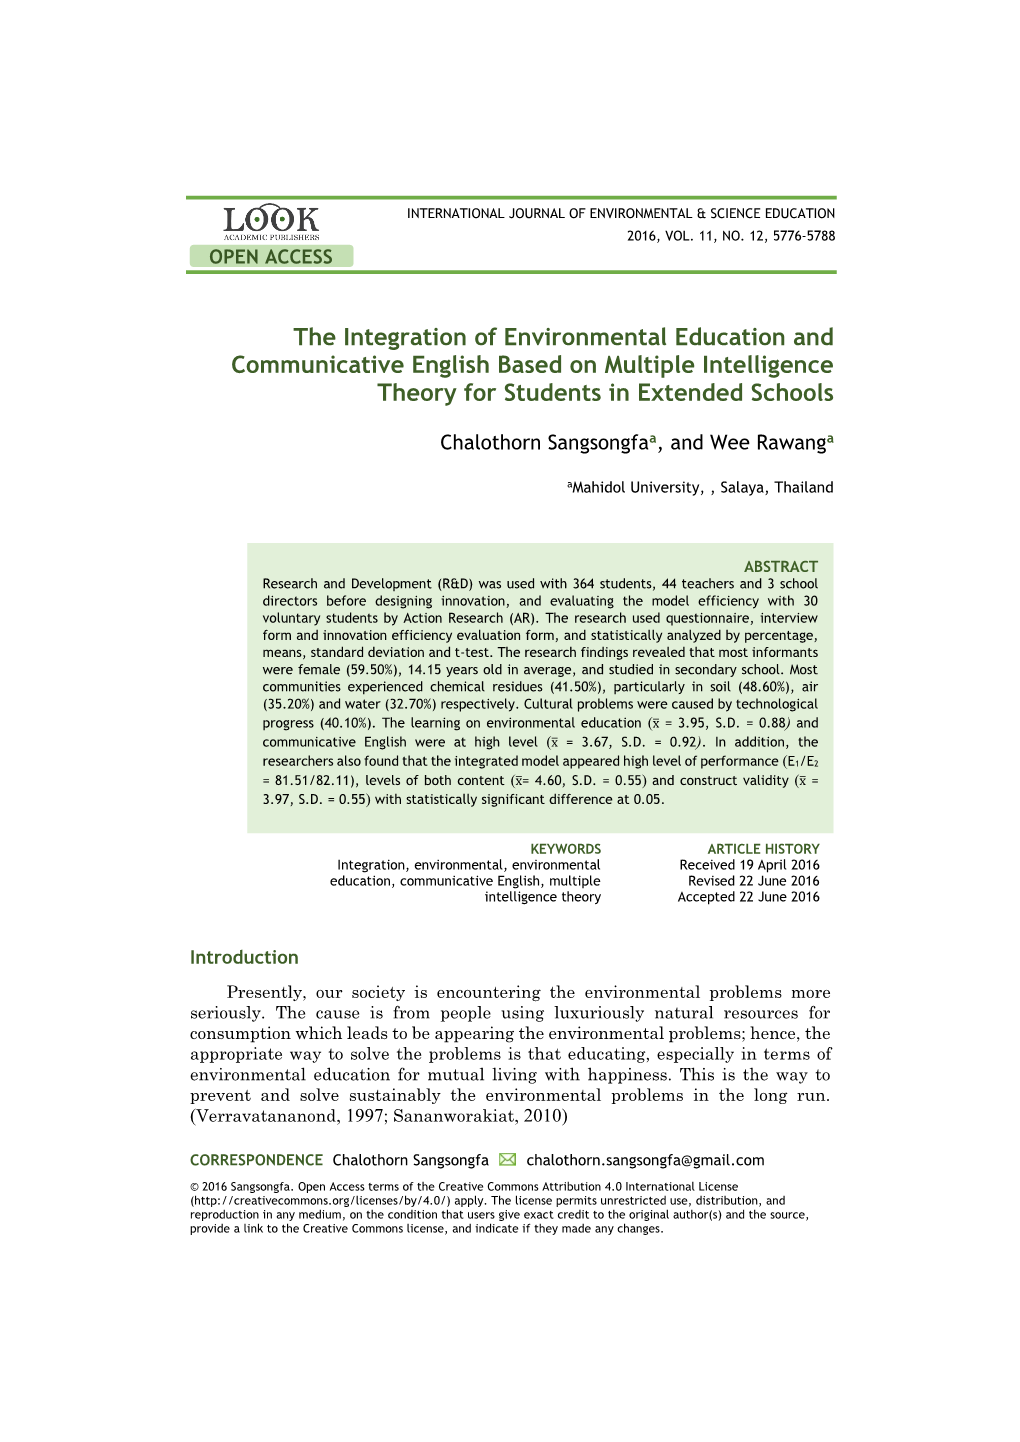 The Integration of Environmental Education and Communicative English Based on Multiple Intelligence Theory for Students in Extended Schools